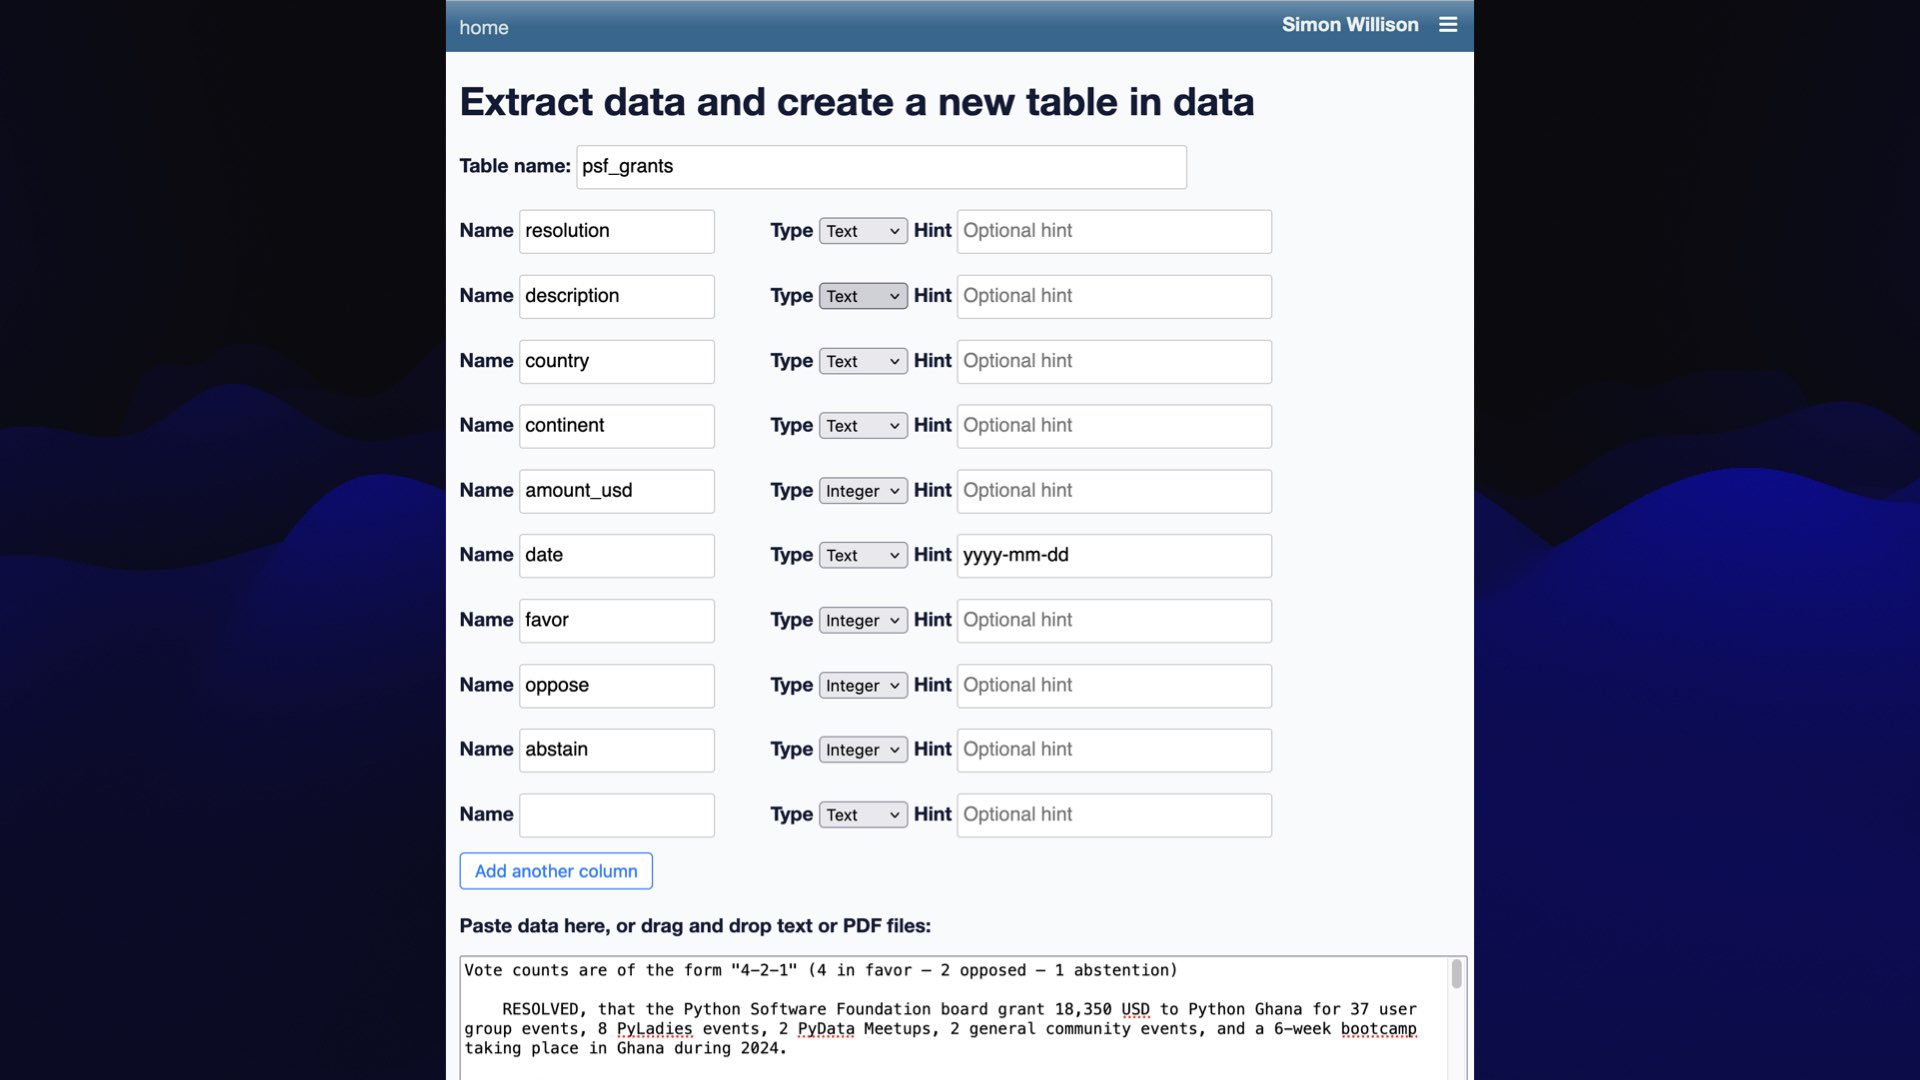  Extract data and create a new table in data Table name: psf_grants Name resolution Type |Text v | Hint Optional hint Name description Type [Text v | Hint Optional hint Name country Type |Text v |Hint Optional hint Name continent Type | Text v Hint Optional hint Name amount_usd Type | Integer v Hint Optional hint Name date Type | Text v Hint yyyy-mm-dd Name favor Type | Integer v Hint Opt: hint Name oppose Type | Integer v |Hint Optional hint Name abstain Type | Integer v Hint Optional hint Name Type |Text v Hint Optional hint [ Add another column | Paste data here, or drag and drop text or PDF files: Vote counts are of the form "4-2-1" (4 in favor — 2 opposed - 1 abstention) RESOLVED, that the Python Software Foundation board grant 18,350 USD to Python Ghana for 37 user group events, 8 Pyladies events, 2 PyData Meetups, 2 general community events, and a 6-week bootcamp taking place in Ghana during 2024. 